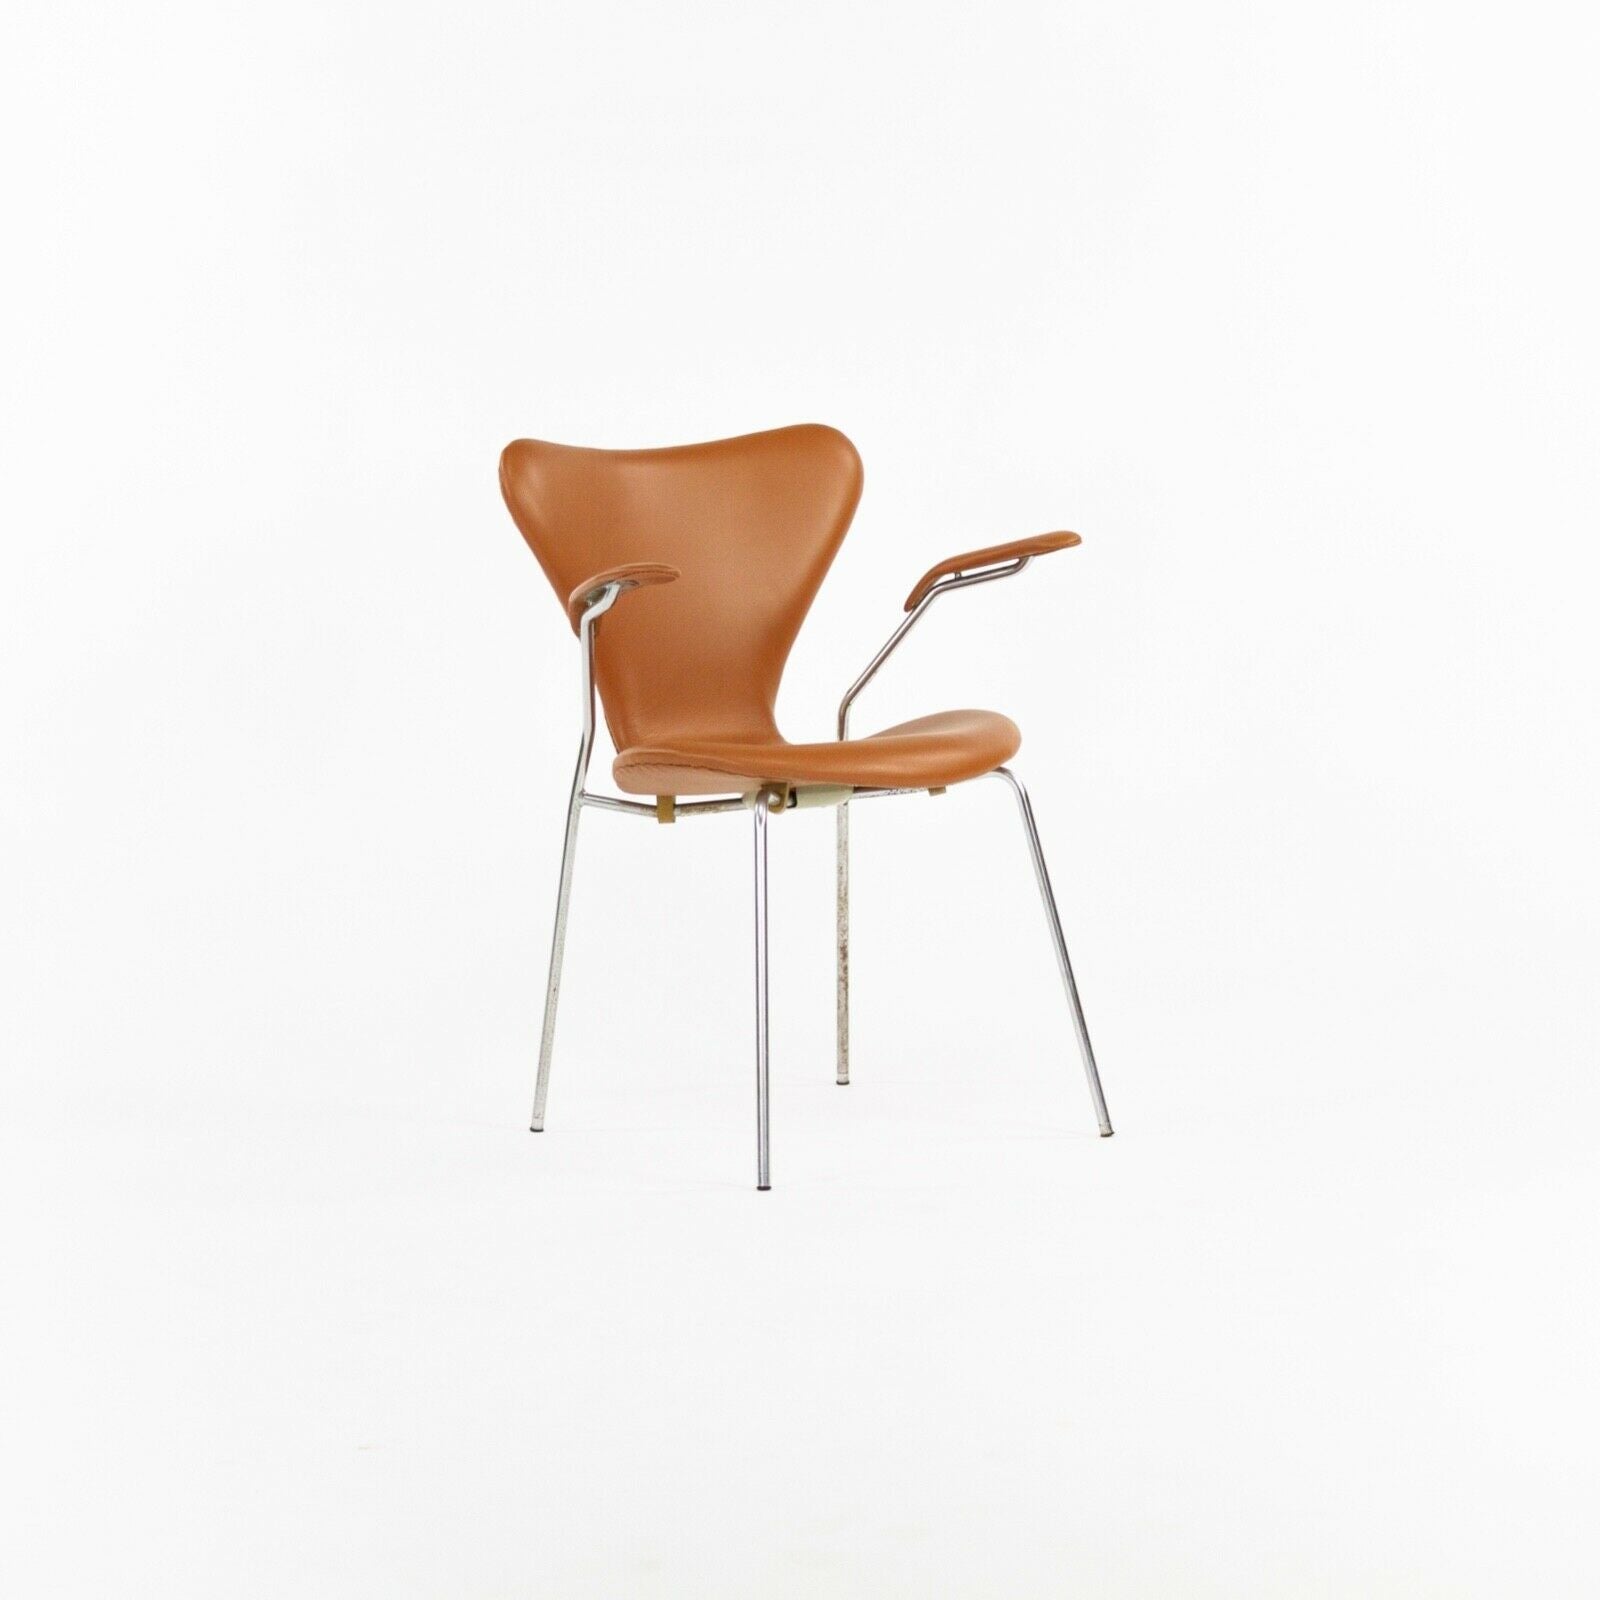 1969 Arne Jacobsen Fritz Hansen Series 7 Armchair Hand Stitched Leather 4-12 Available